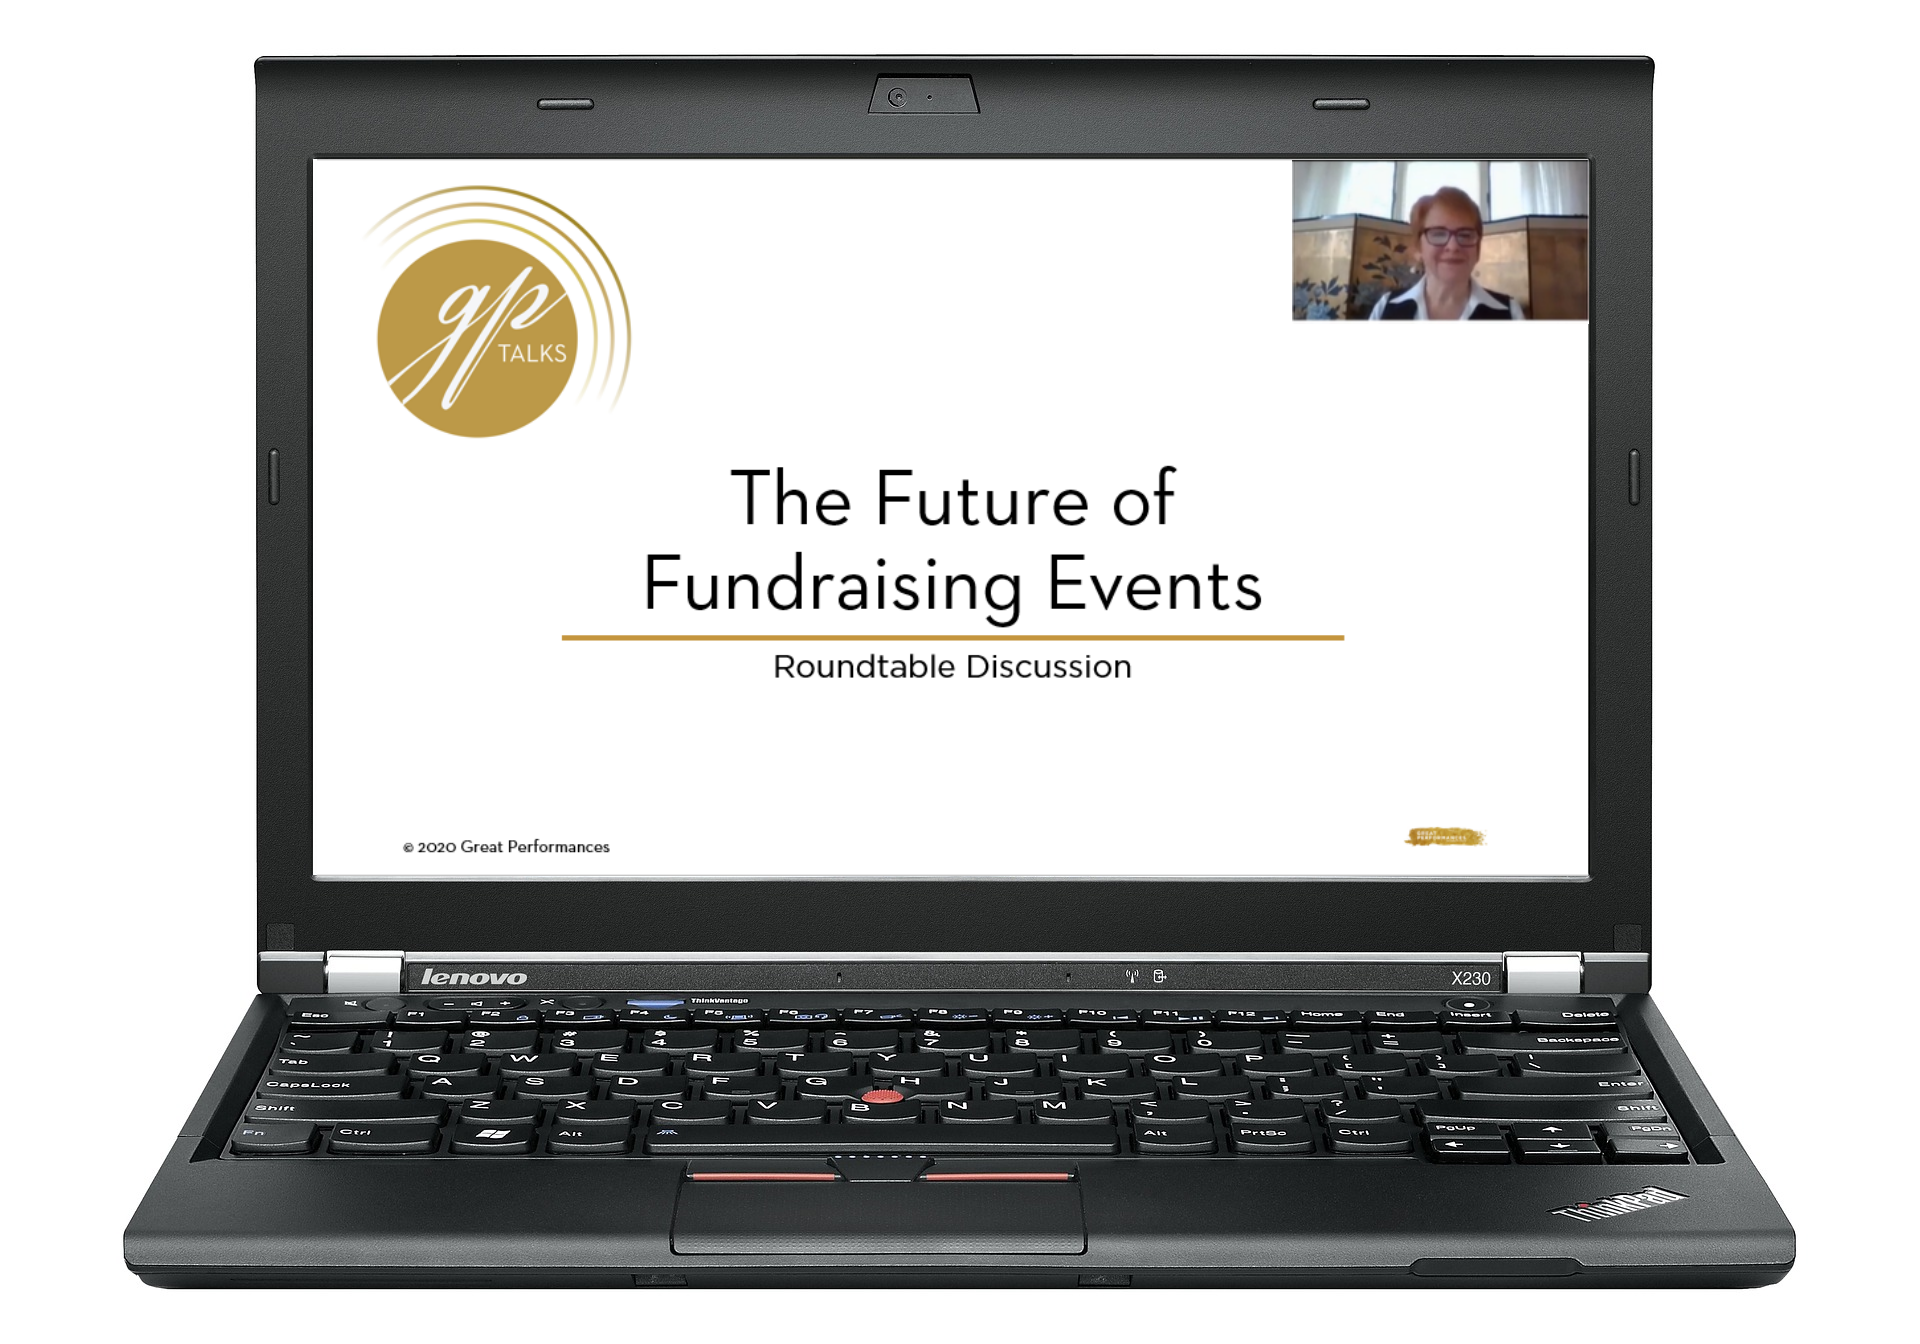 GP Talks: The Future of Fundraising Events